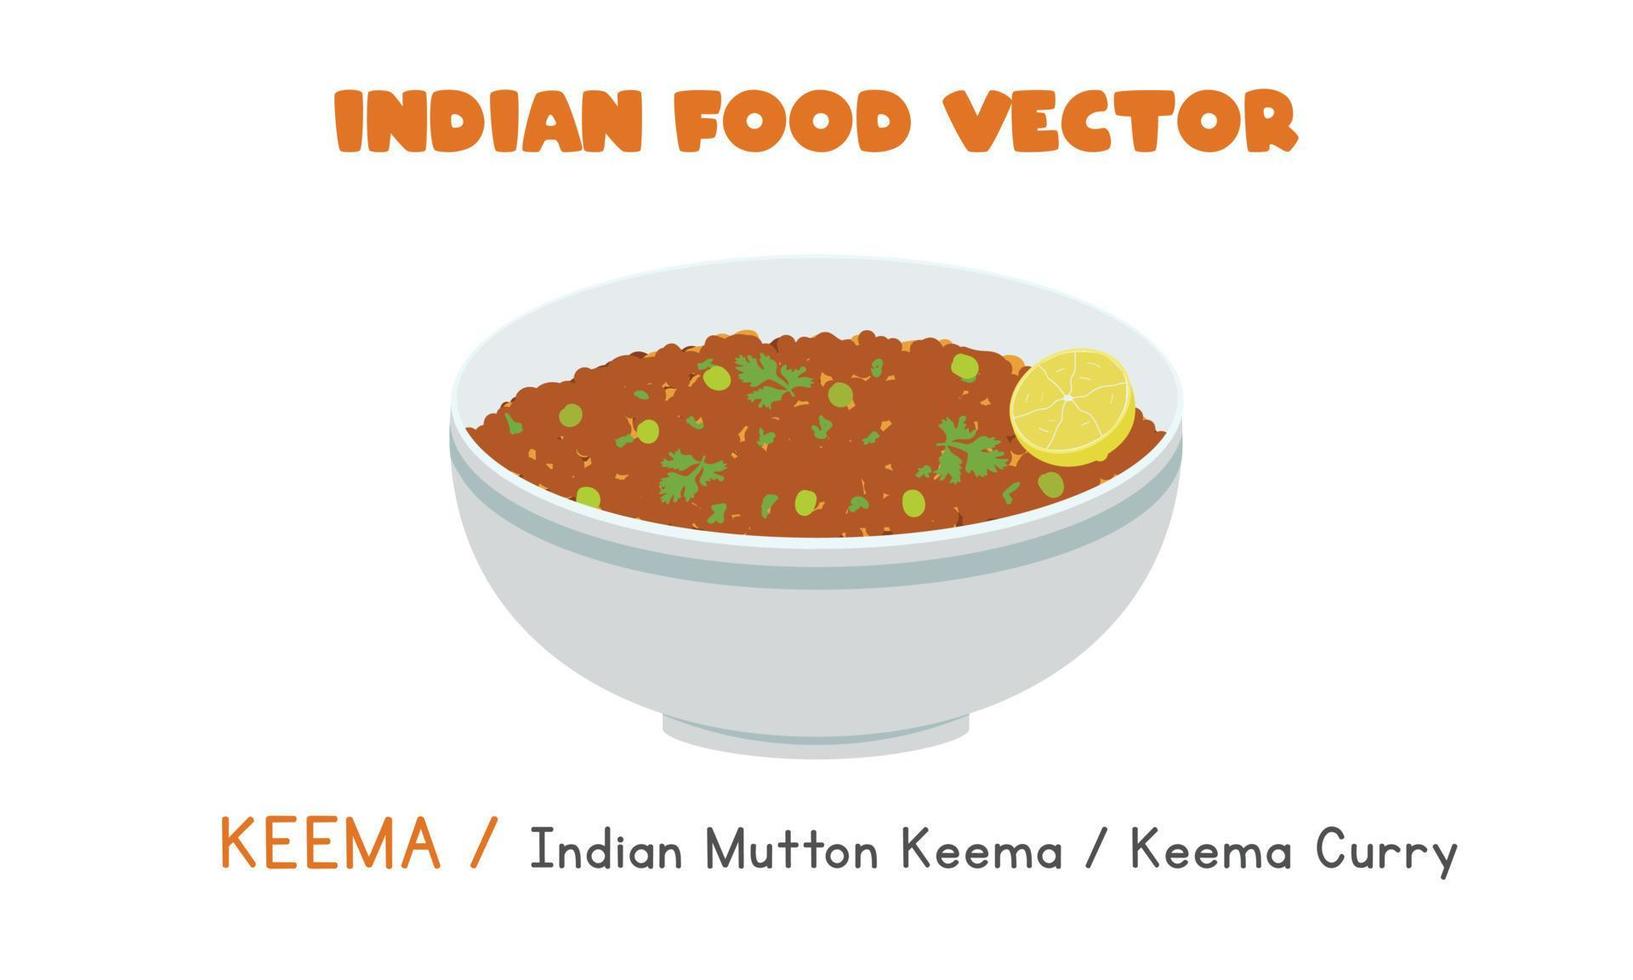 Indian Keema flat vector illustration isolated on white background clipart cartoon. Asian food. Indian cuisine. Indian food